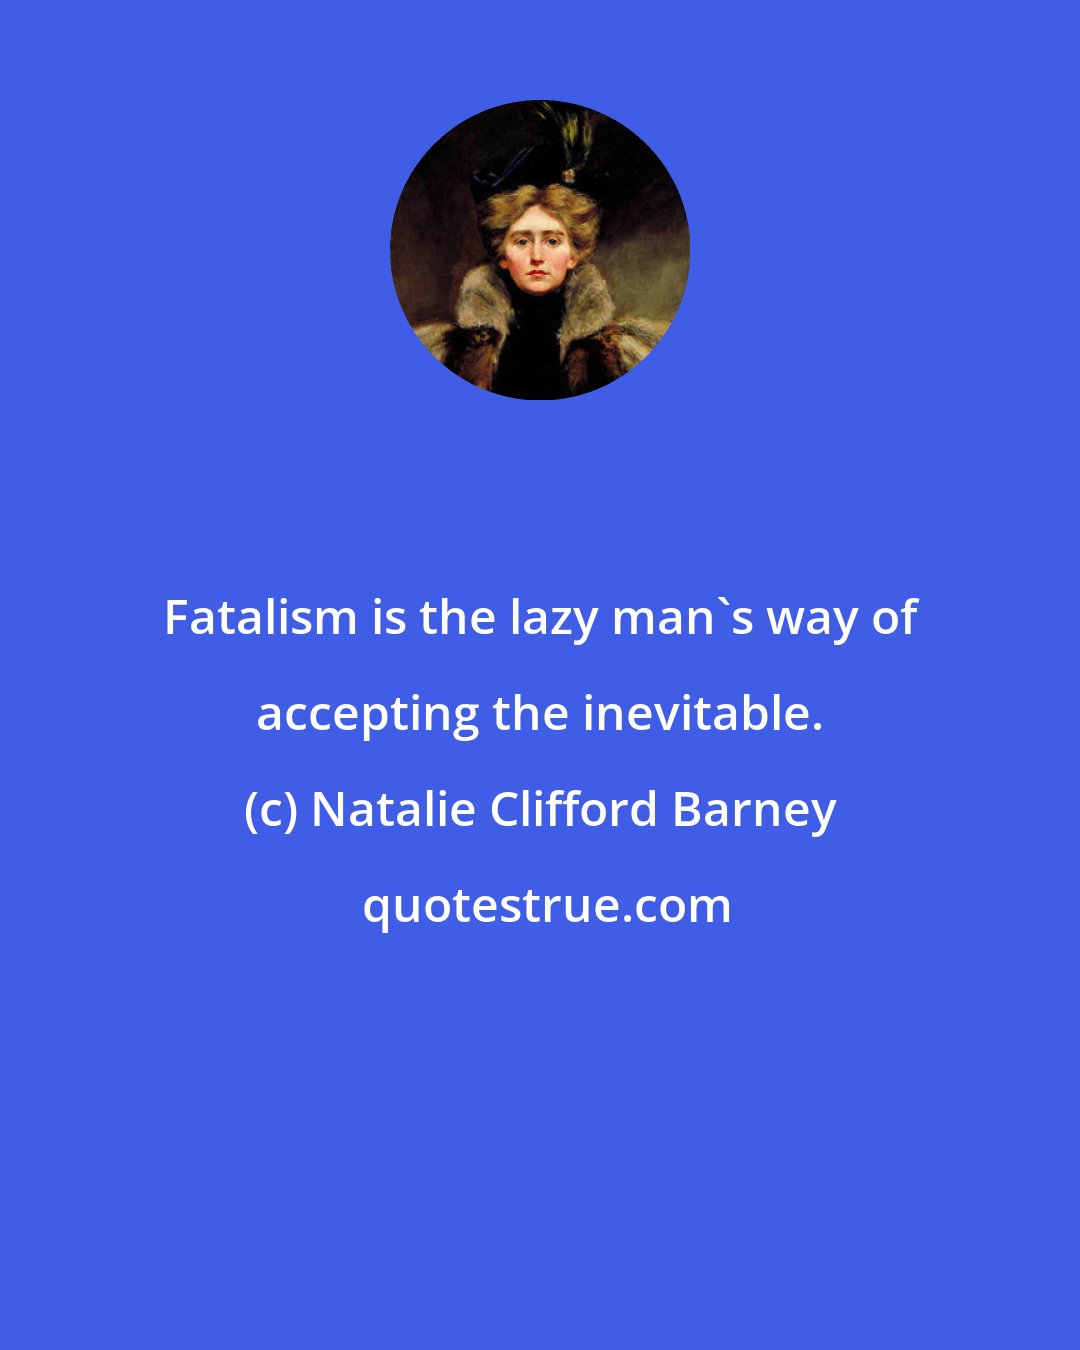 Natalie Clifford Barney: Fatalism is the lazy man's way of accepting the inevitable.